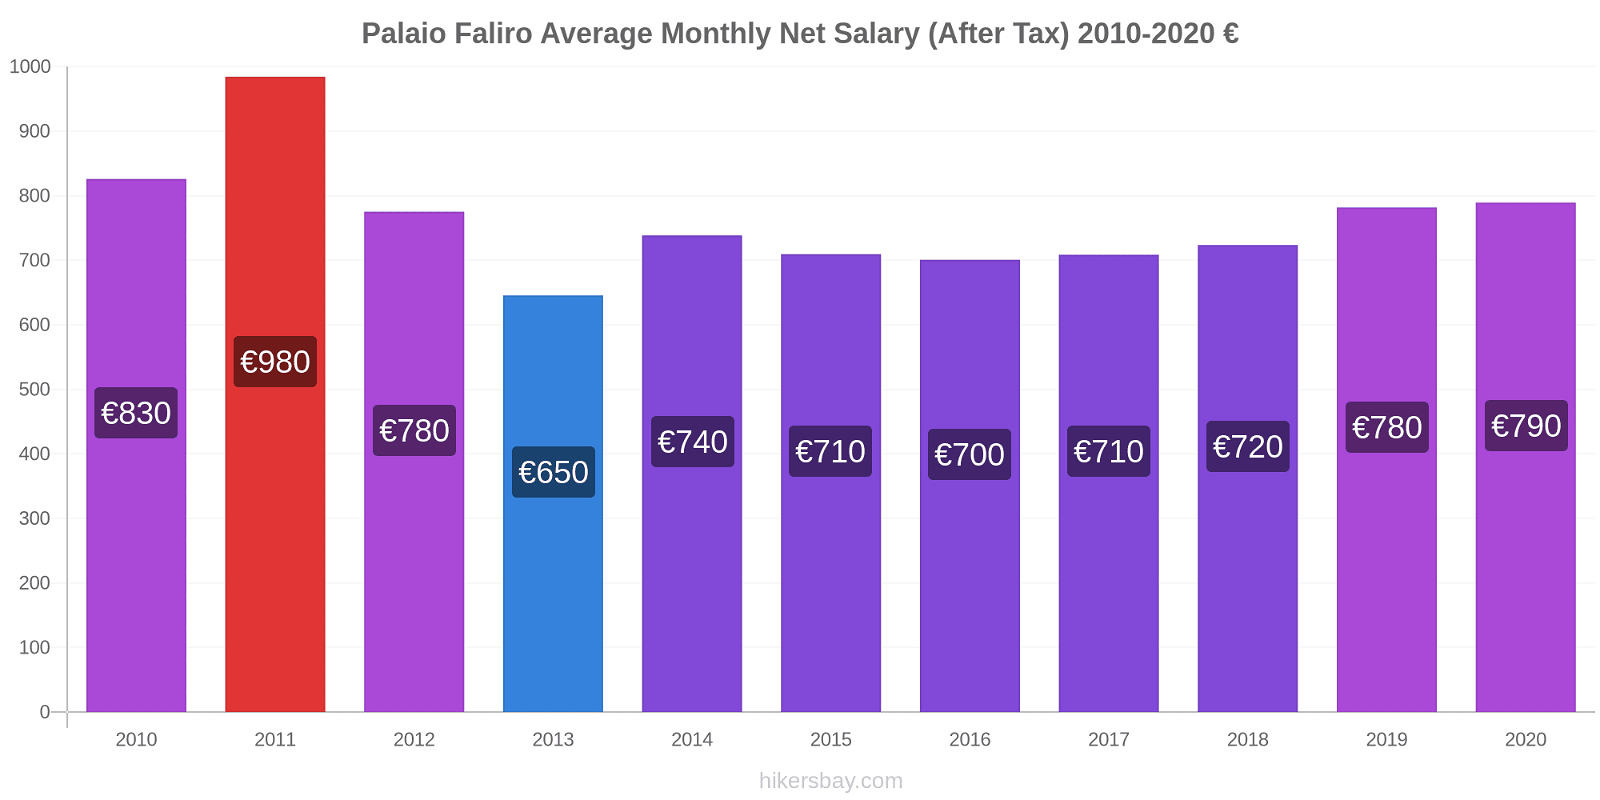 Palaio Faliro price changes Average Monthly Net Salary (After Tax) hikersbay.com